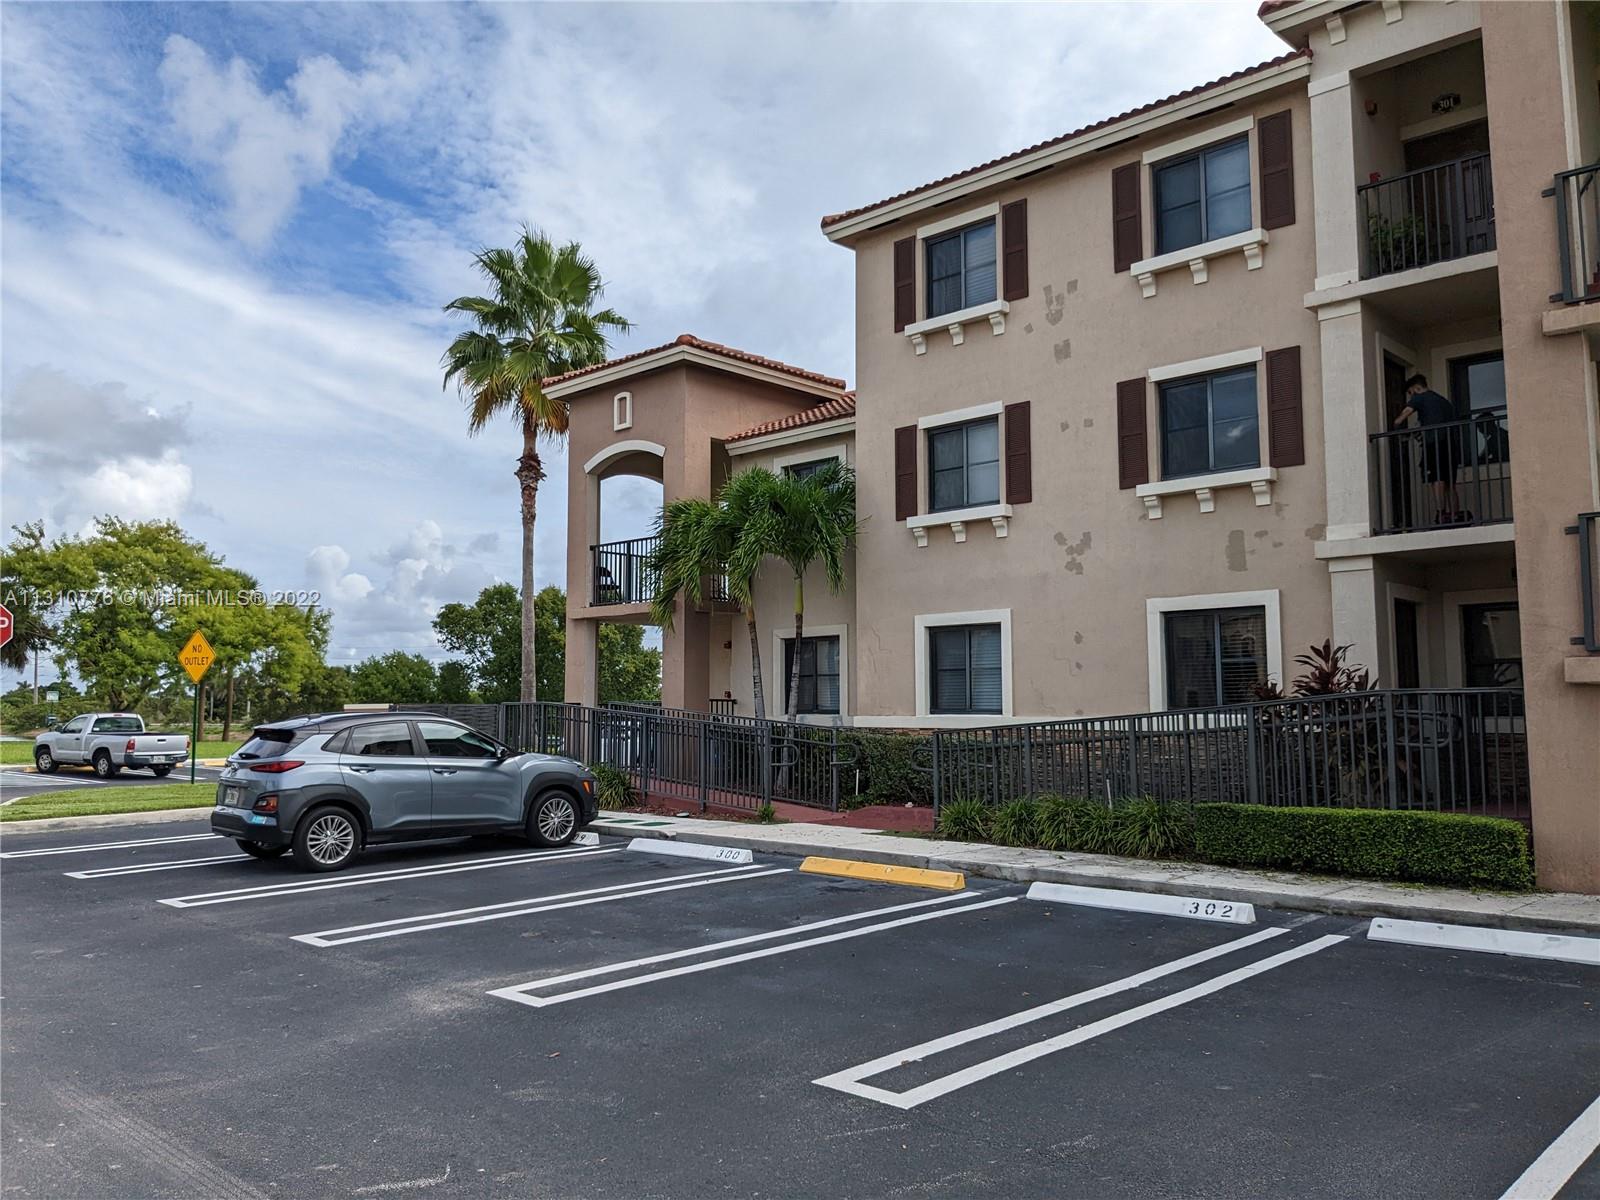 Gorgeous 2 bedroom and 2 bath condo in desirable Courts at Bayshore. Unit boasts a bright and open floorplan, kitchen includes stainless appliances and granite countertops. Expansive covered balcony off living room. Okay to lease right away and pets allowed!